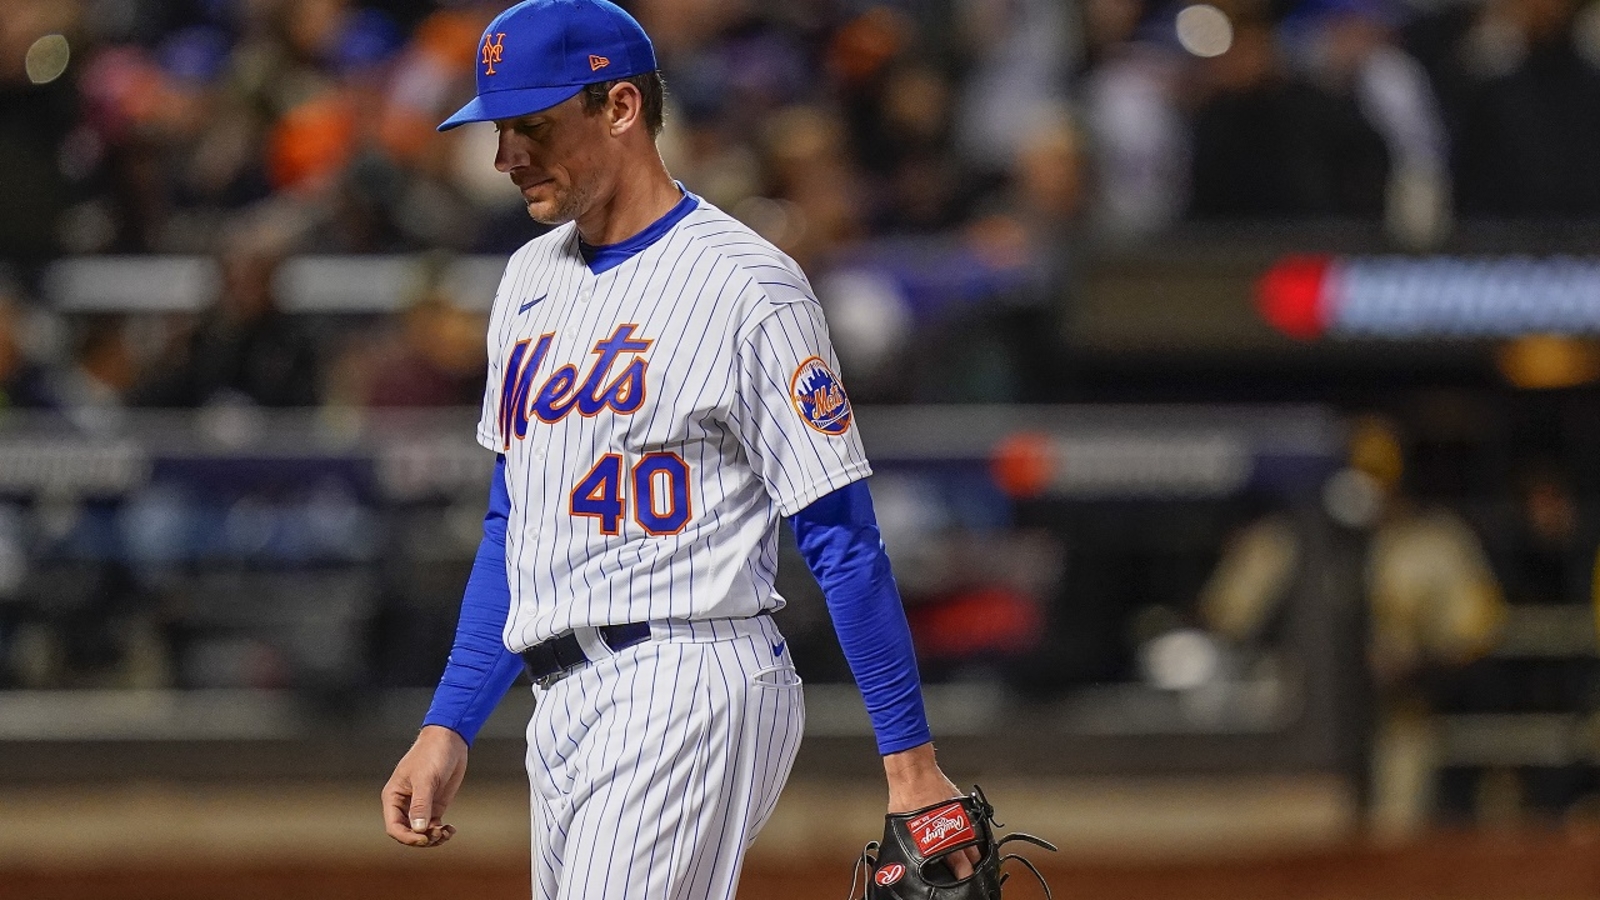 Mets eliminated from postseason after 6-0 loss to Padres in Game 3 of Wild Card series